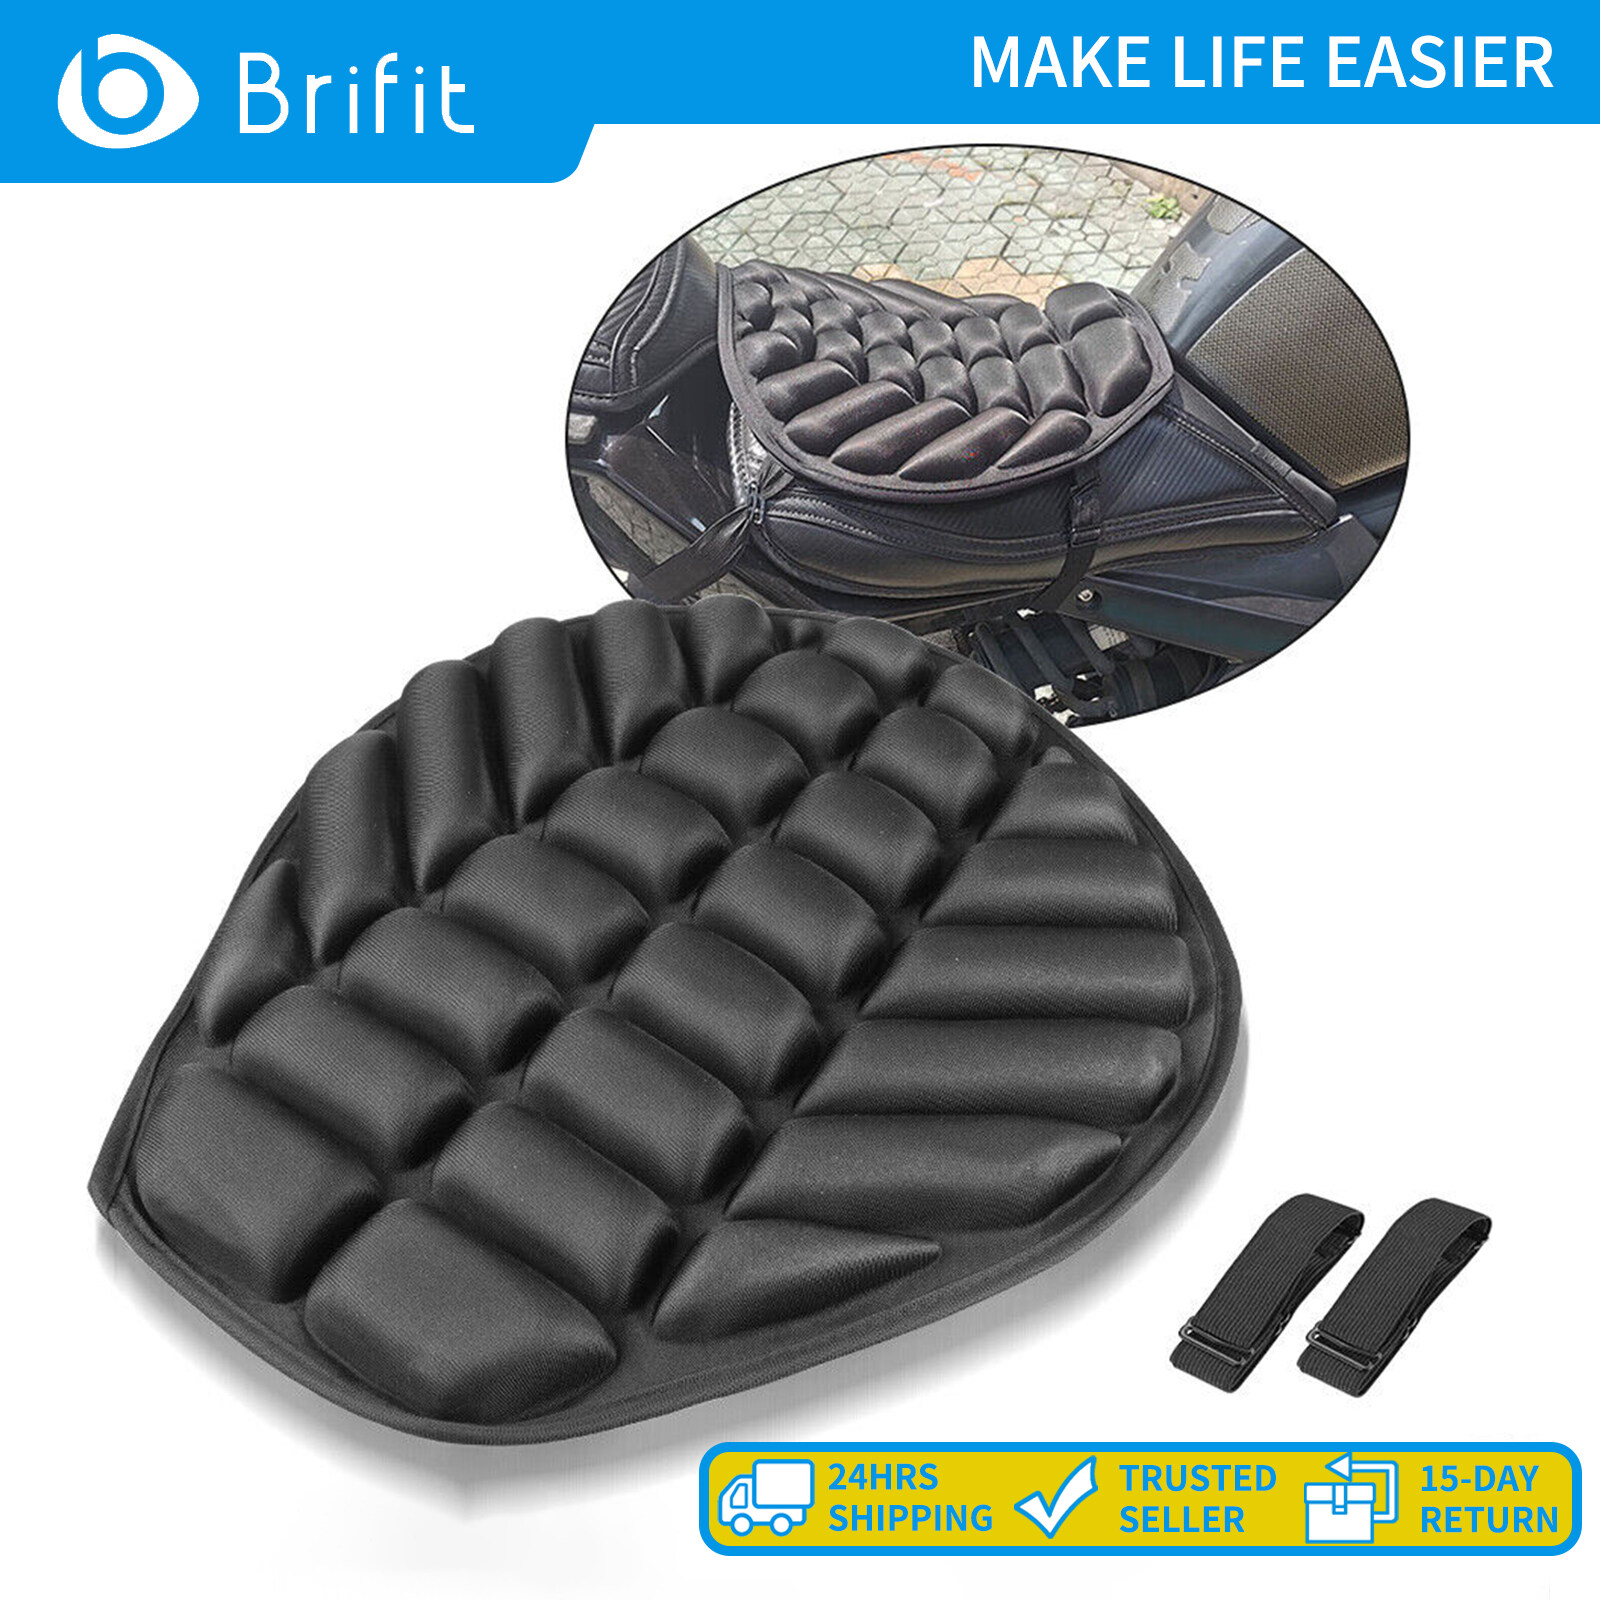 Brifit 3D motorcycle seat cushion breathable shock absorption cushion